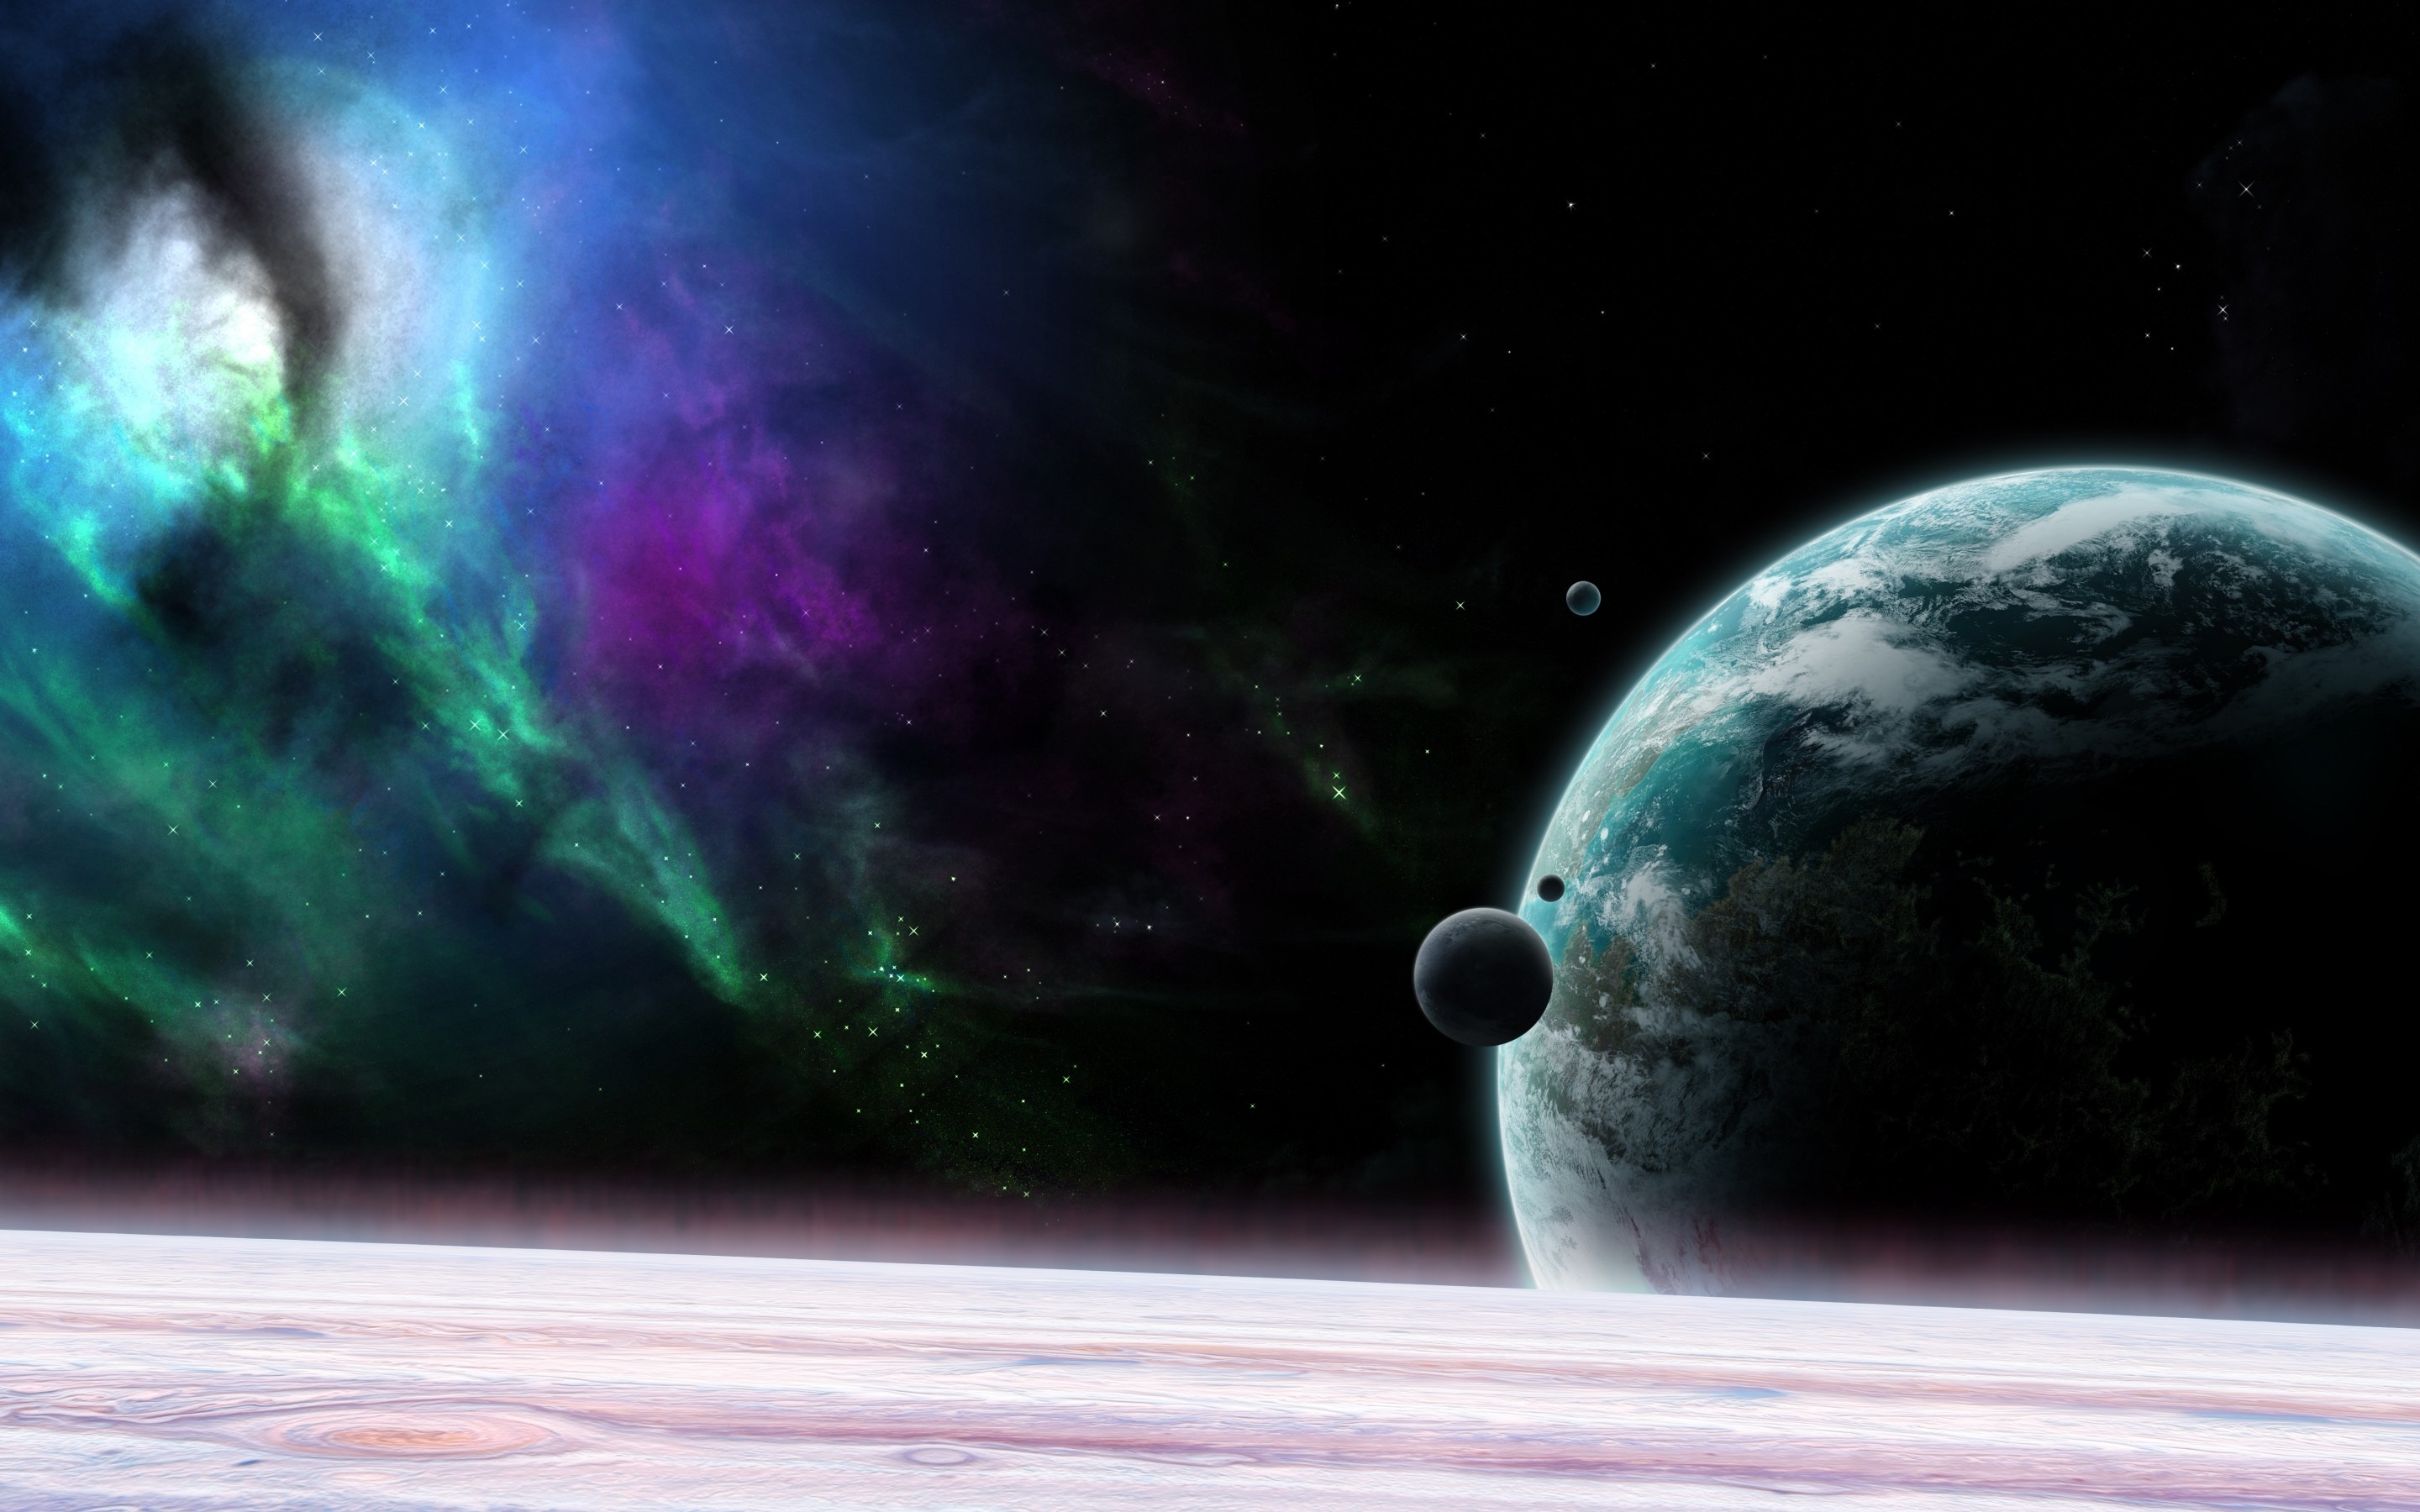 View from Universe for 2880 x 1800 Retina Display resolution